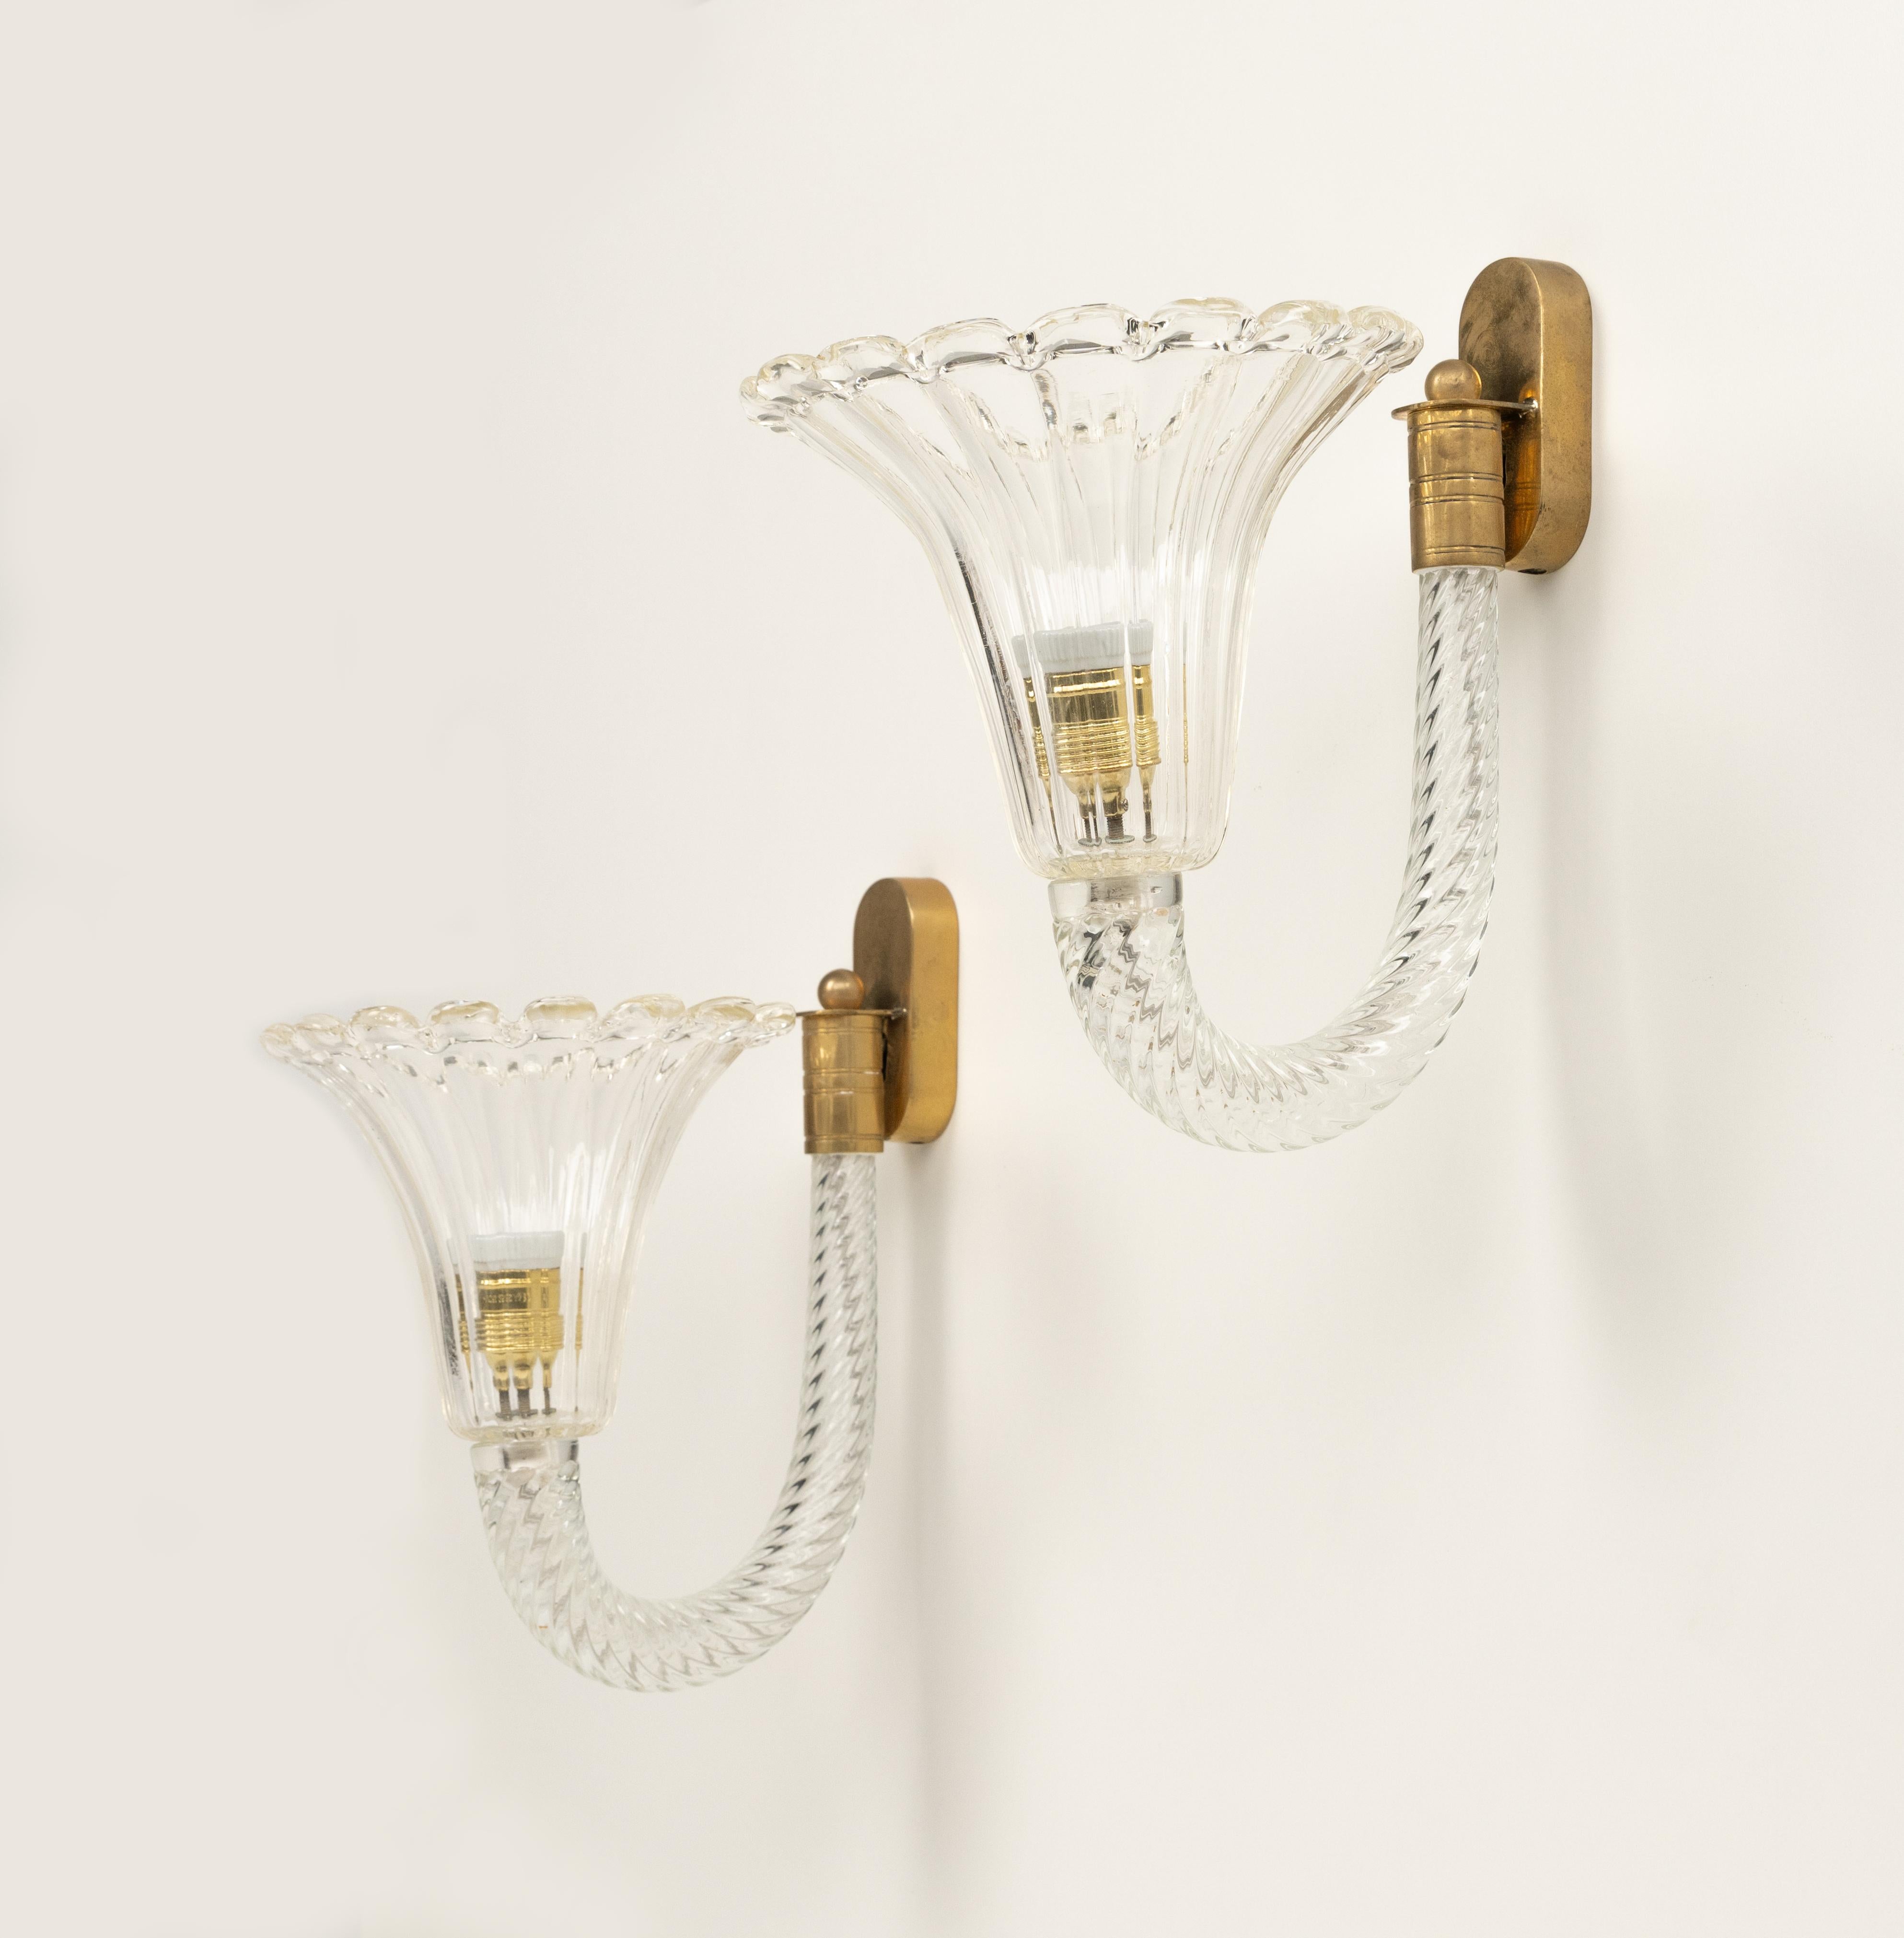 Pair of Sconces Murano Glass & Brass Barovier & Toso Style, Italy 1950s For Sale 3